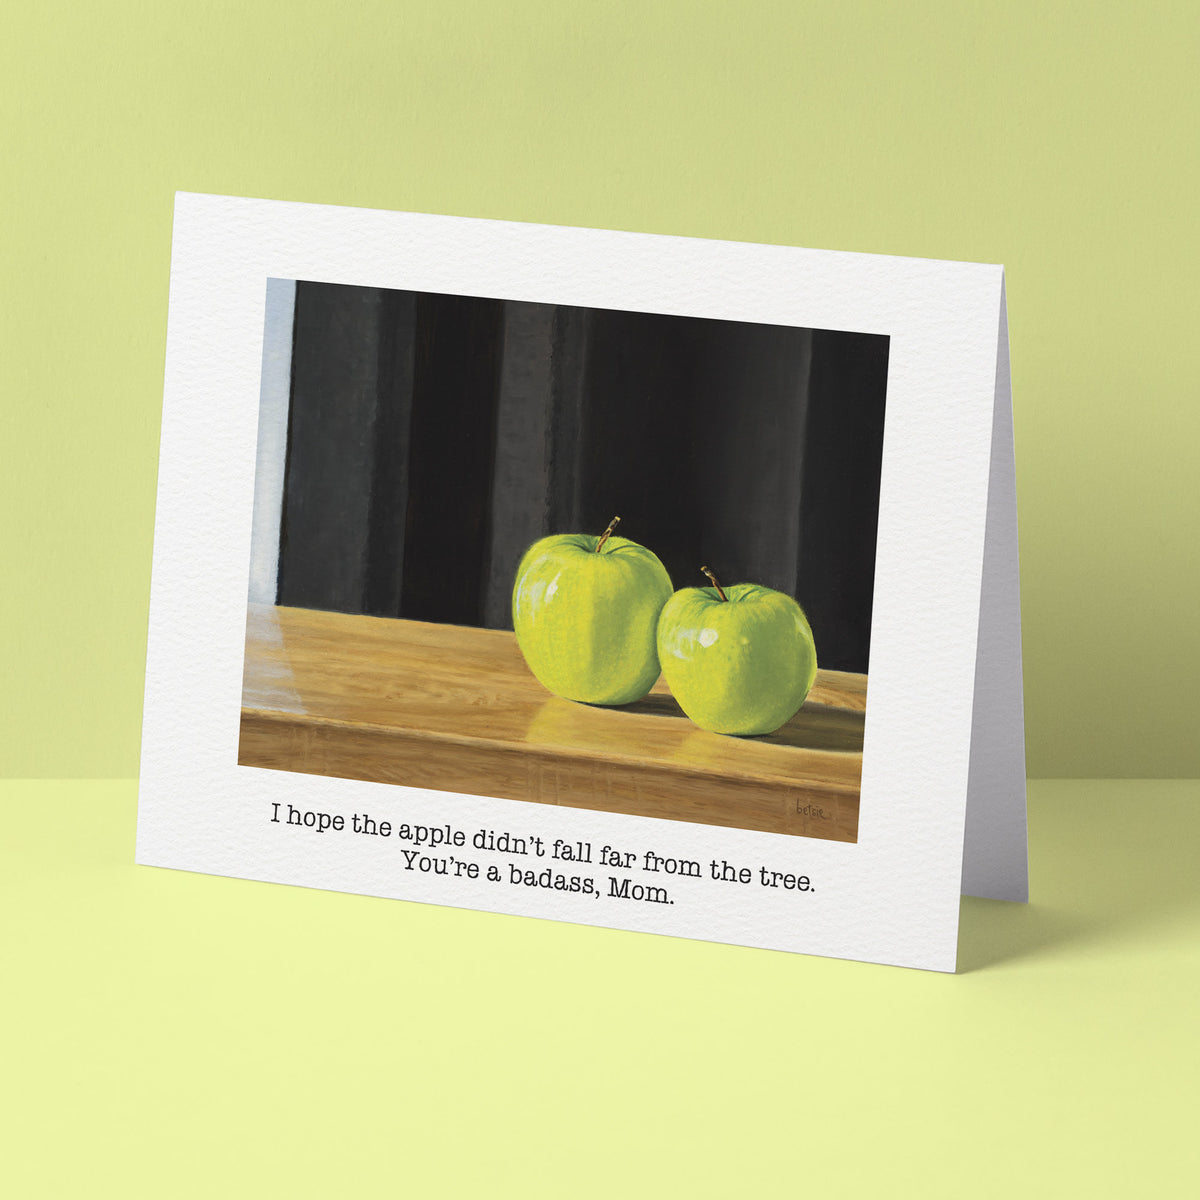 "I hope the apple didn't fall far from the tree" Greeting Card